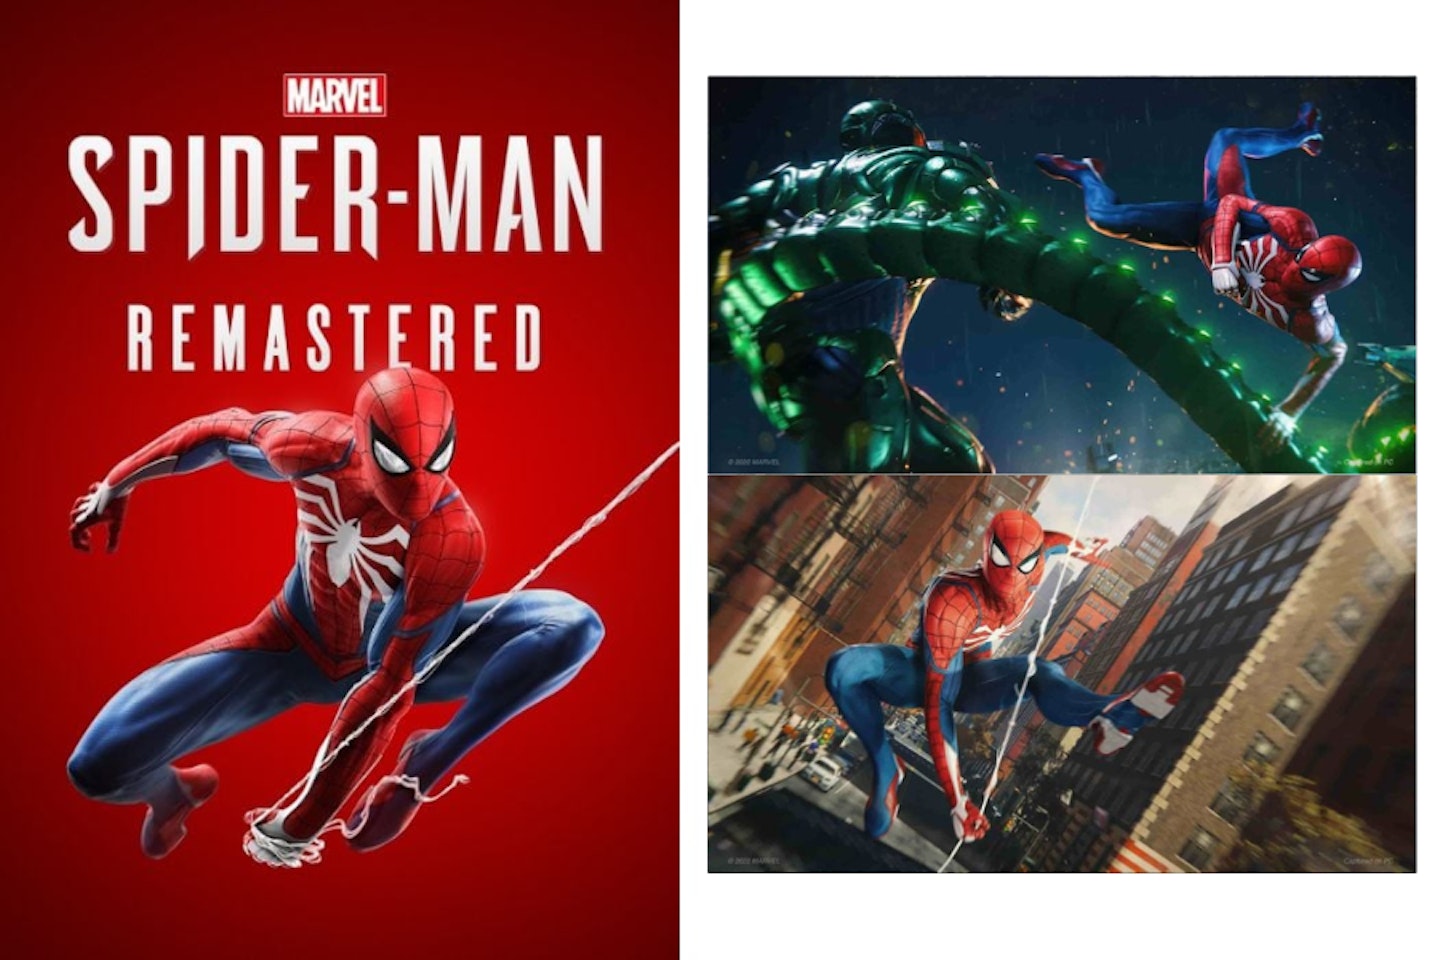 Spider-man Remastered - one of the best PC games